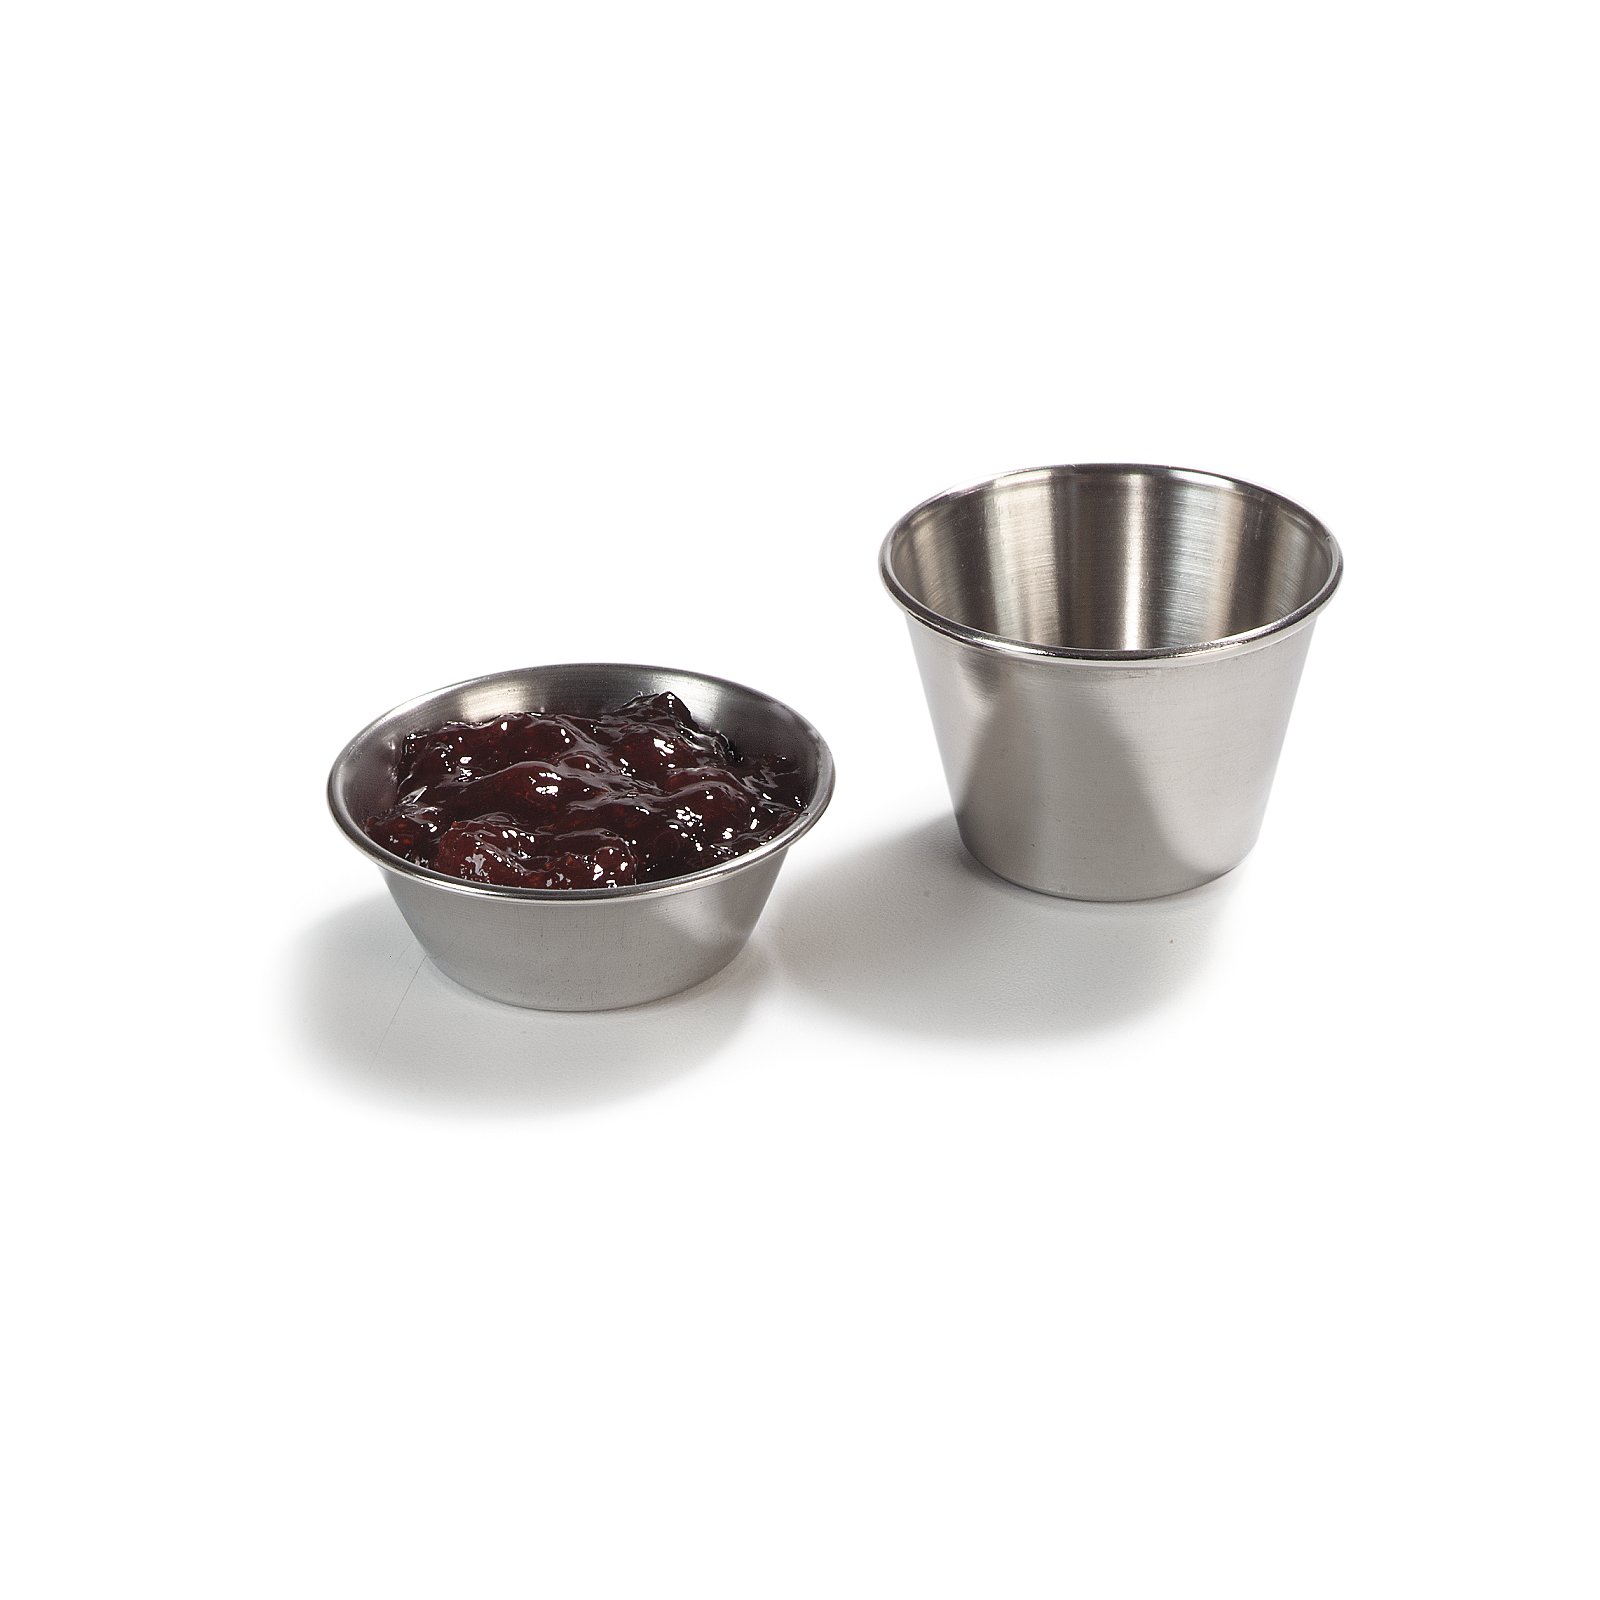 144 Pack) 2.5 oz Stainless Steel Sauce Cups, Condiment Cups